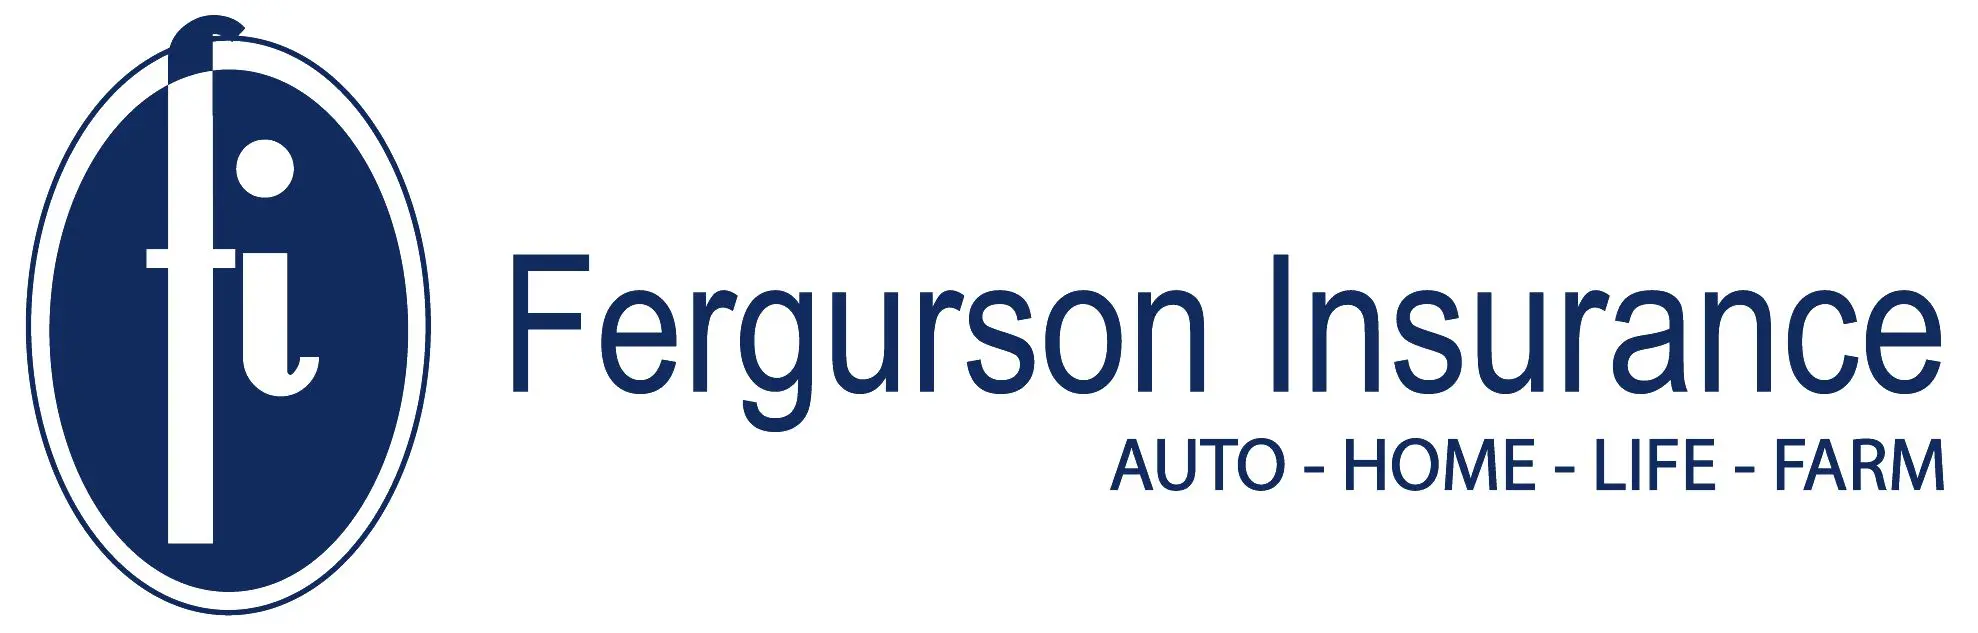 A blue and white logo of the ferguson institute.